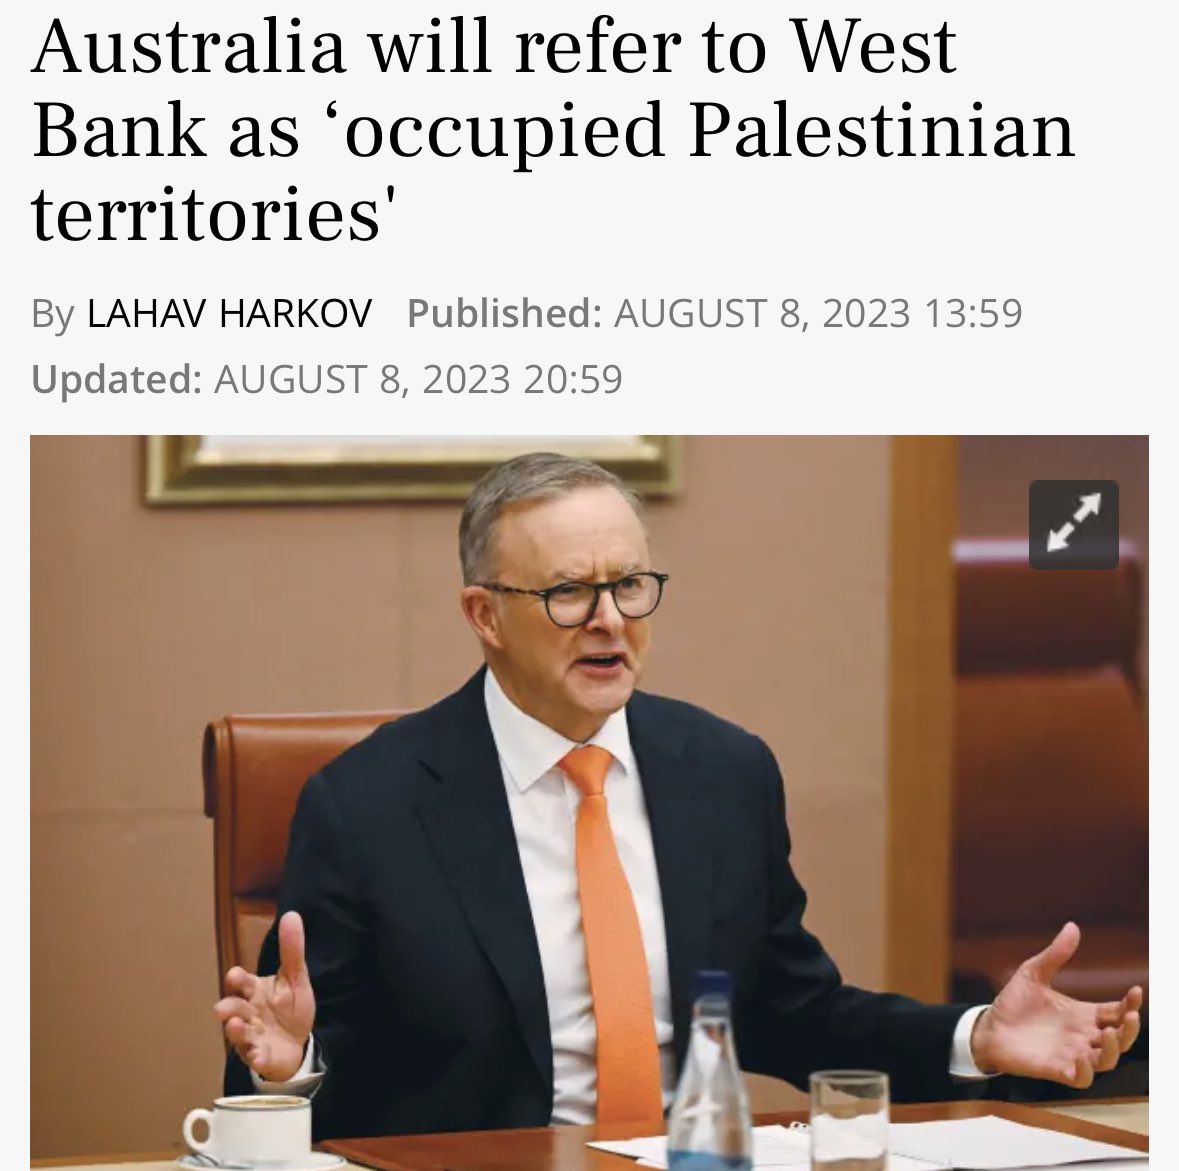 It’s quite absurd that Australia thinks they’re entitled to define what is and isn’t Israel. Where Jews are, or are not allowed to live. The Jewish people and our state do not take marching orders from Australia (esp given their historical treatment of their indigenous…